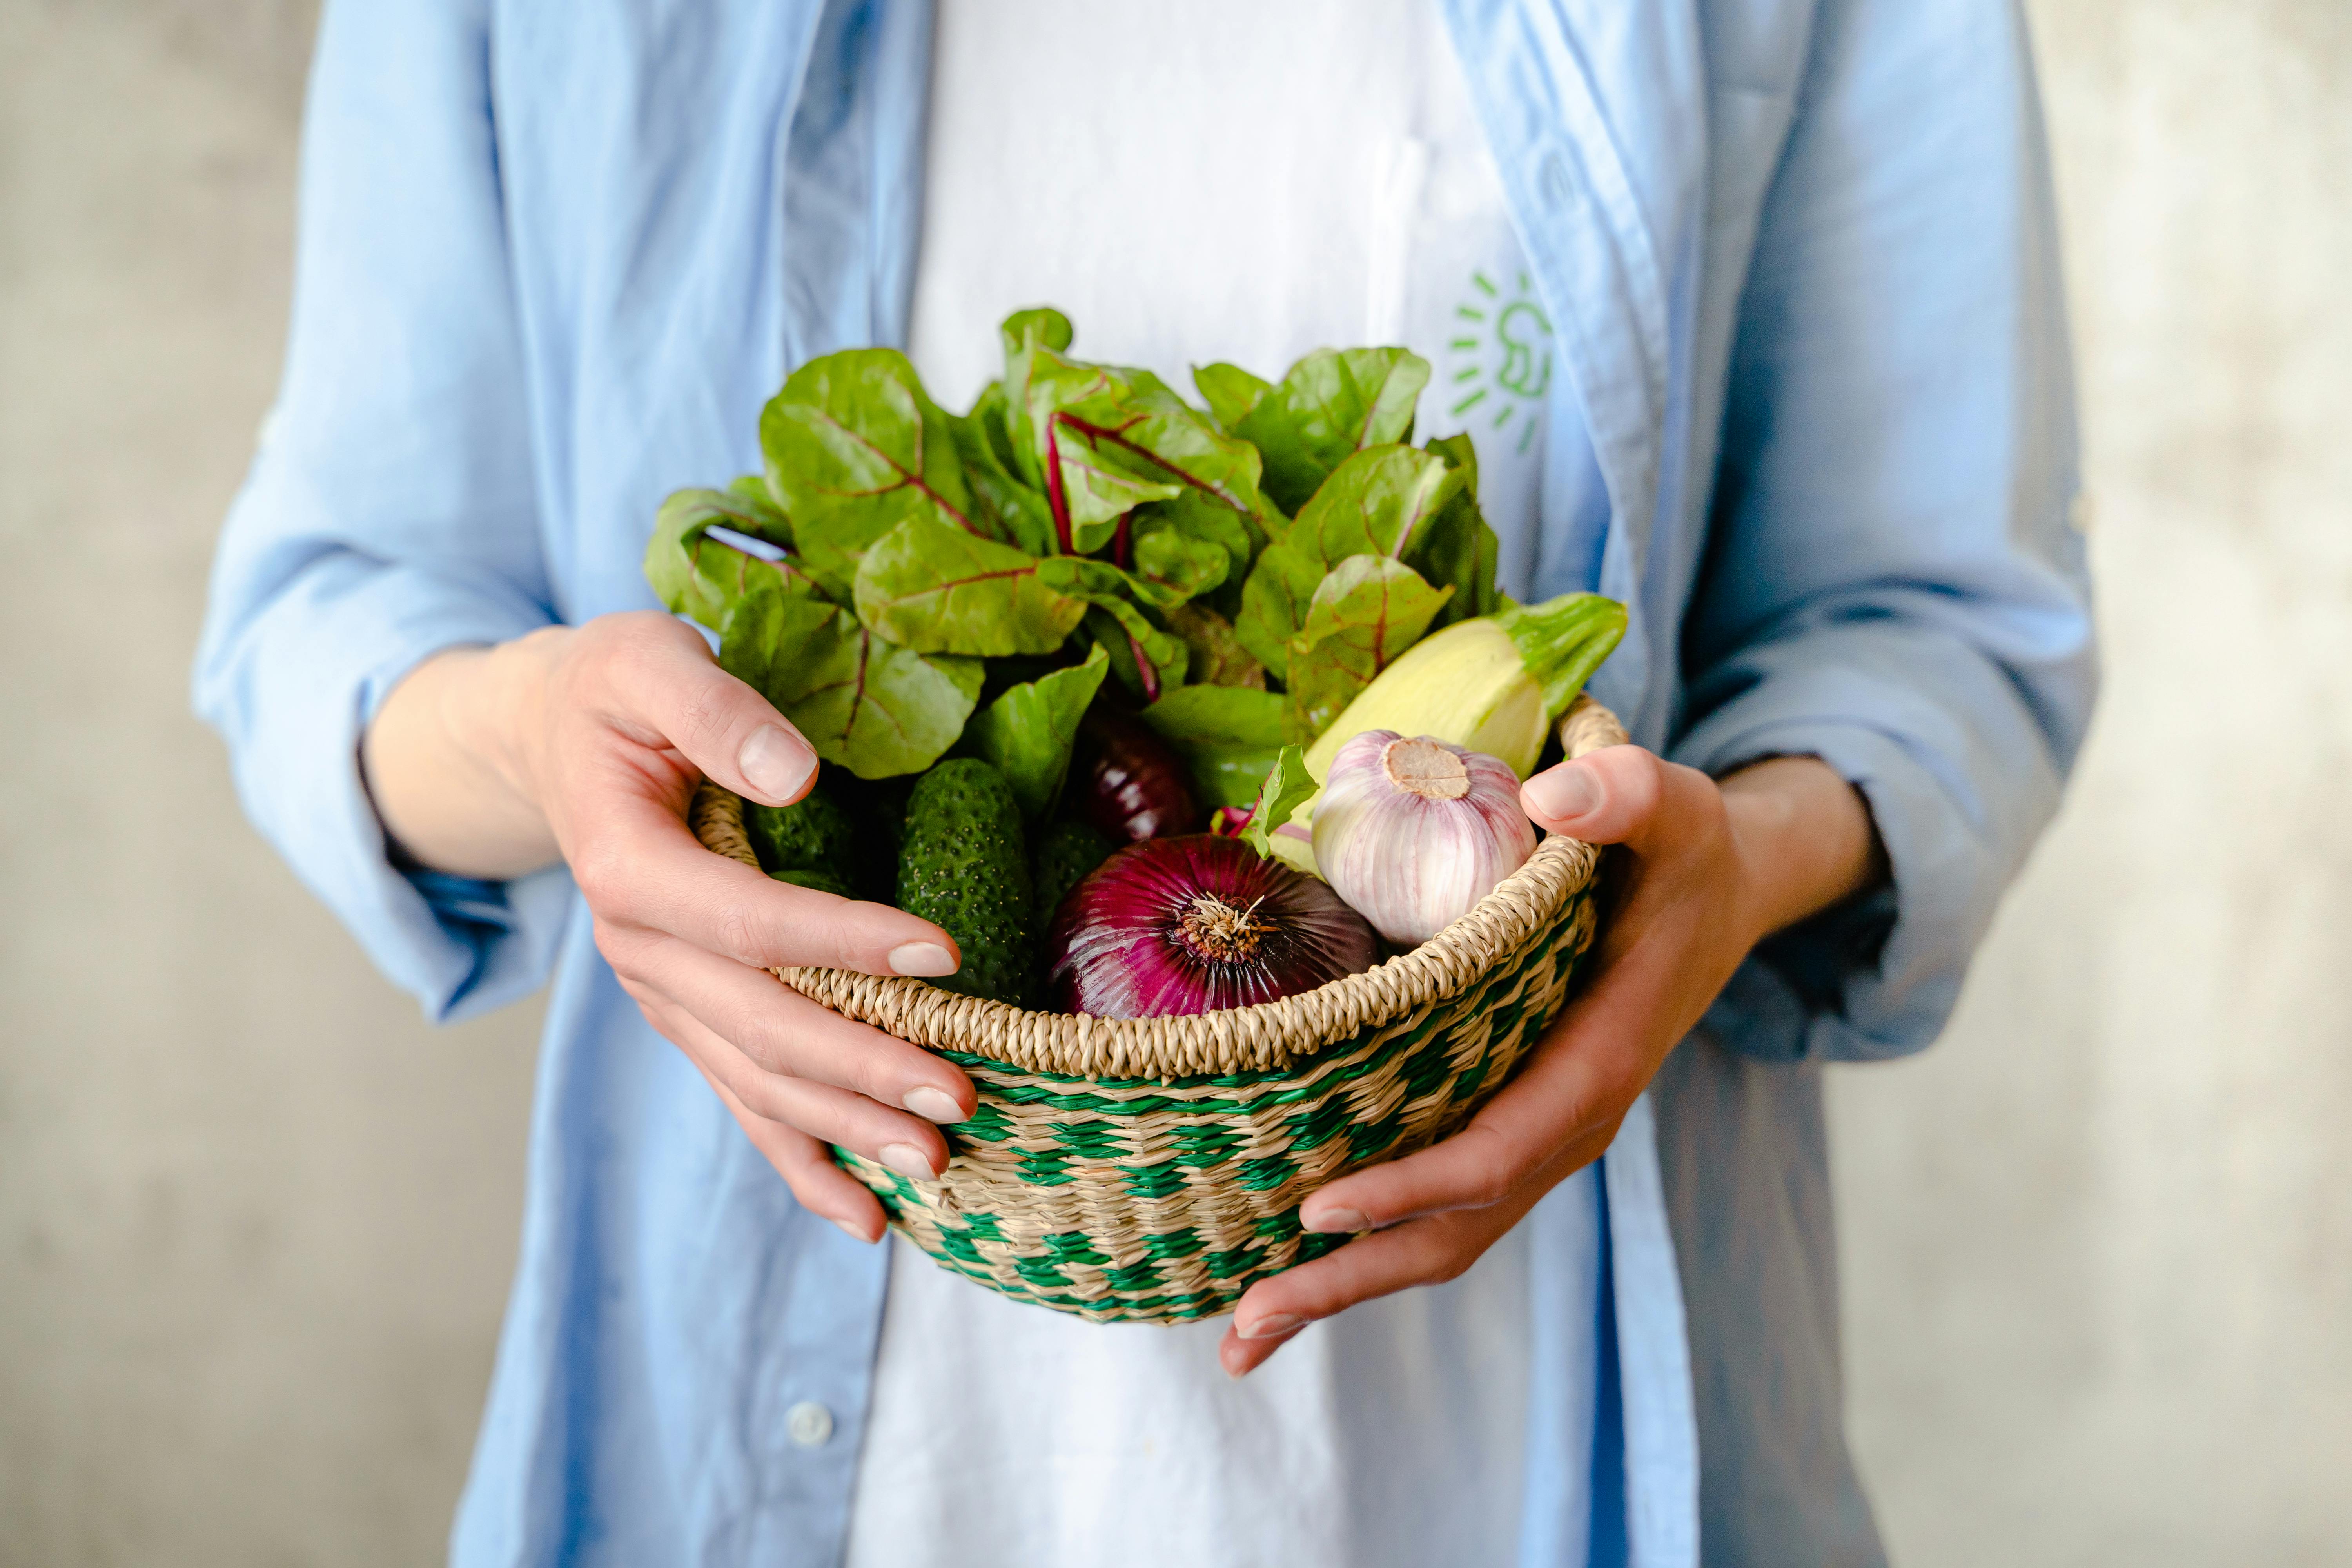 close up photo of a person s hands holding a basket with vegetables